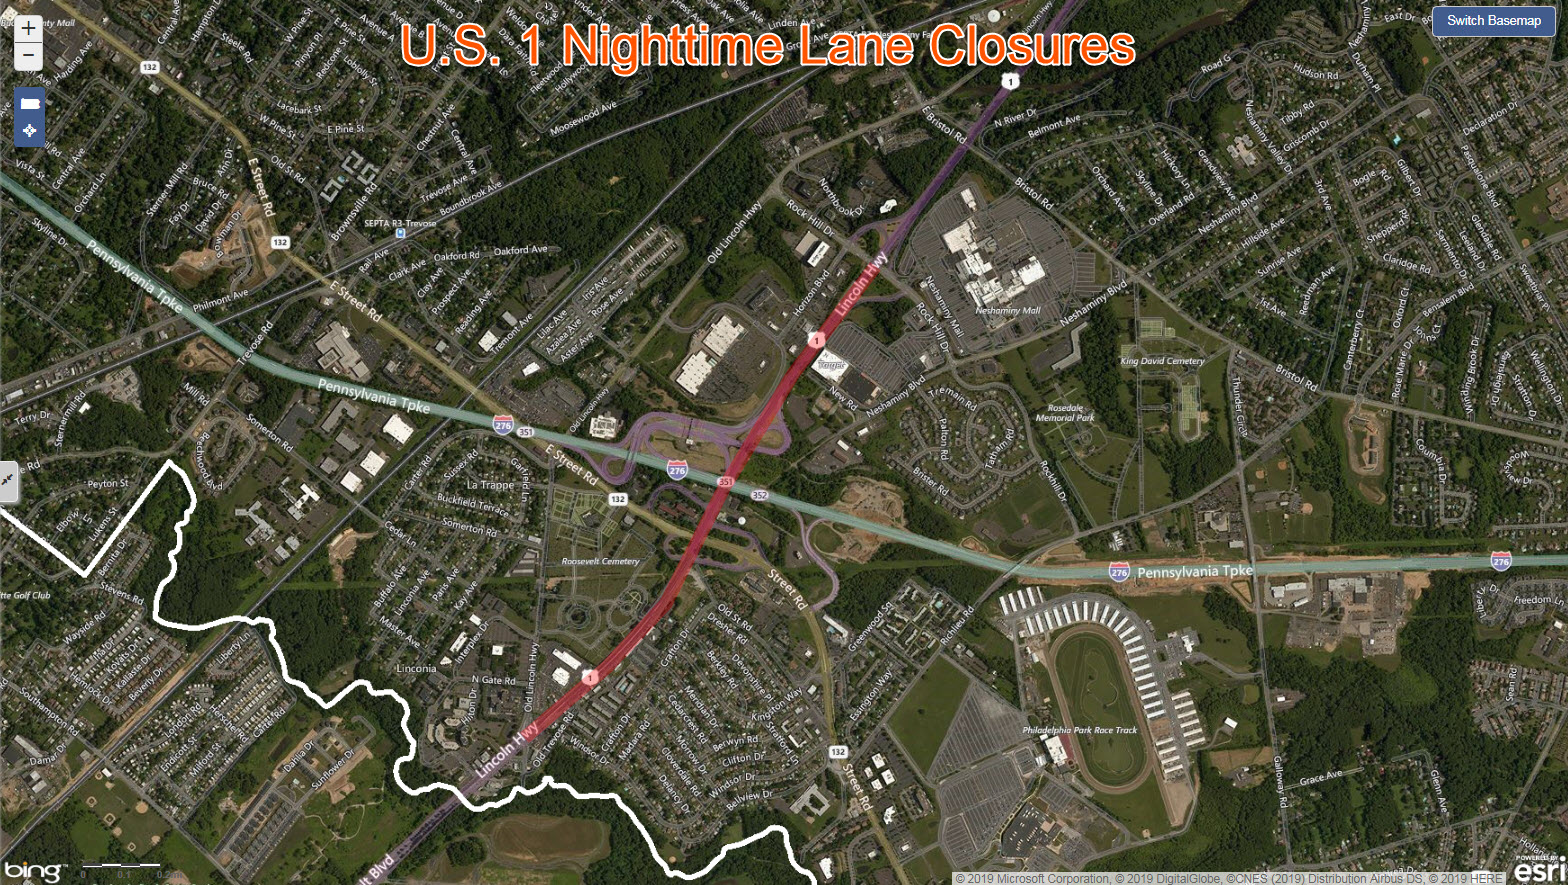 US 1 Night Lane Closures Rockhill to Old Lincoln.jpg